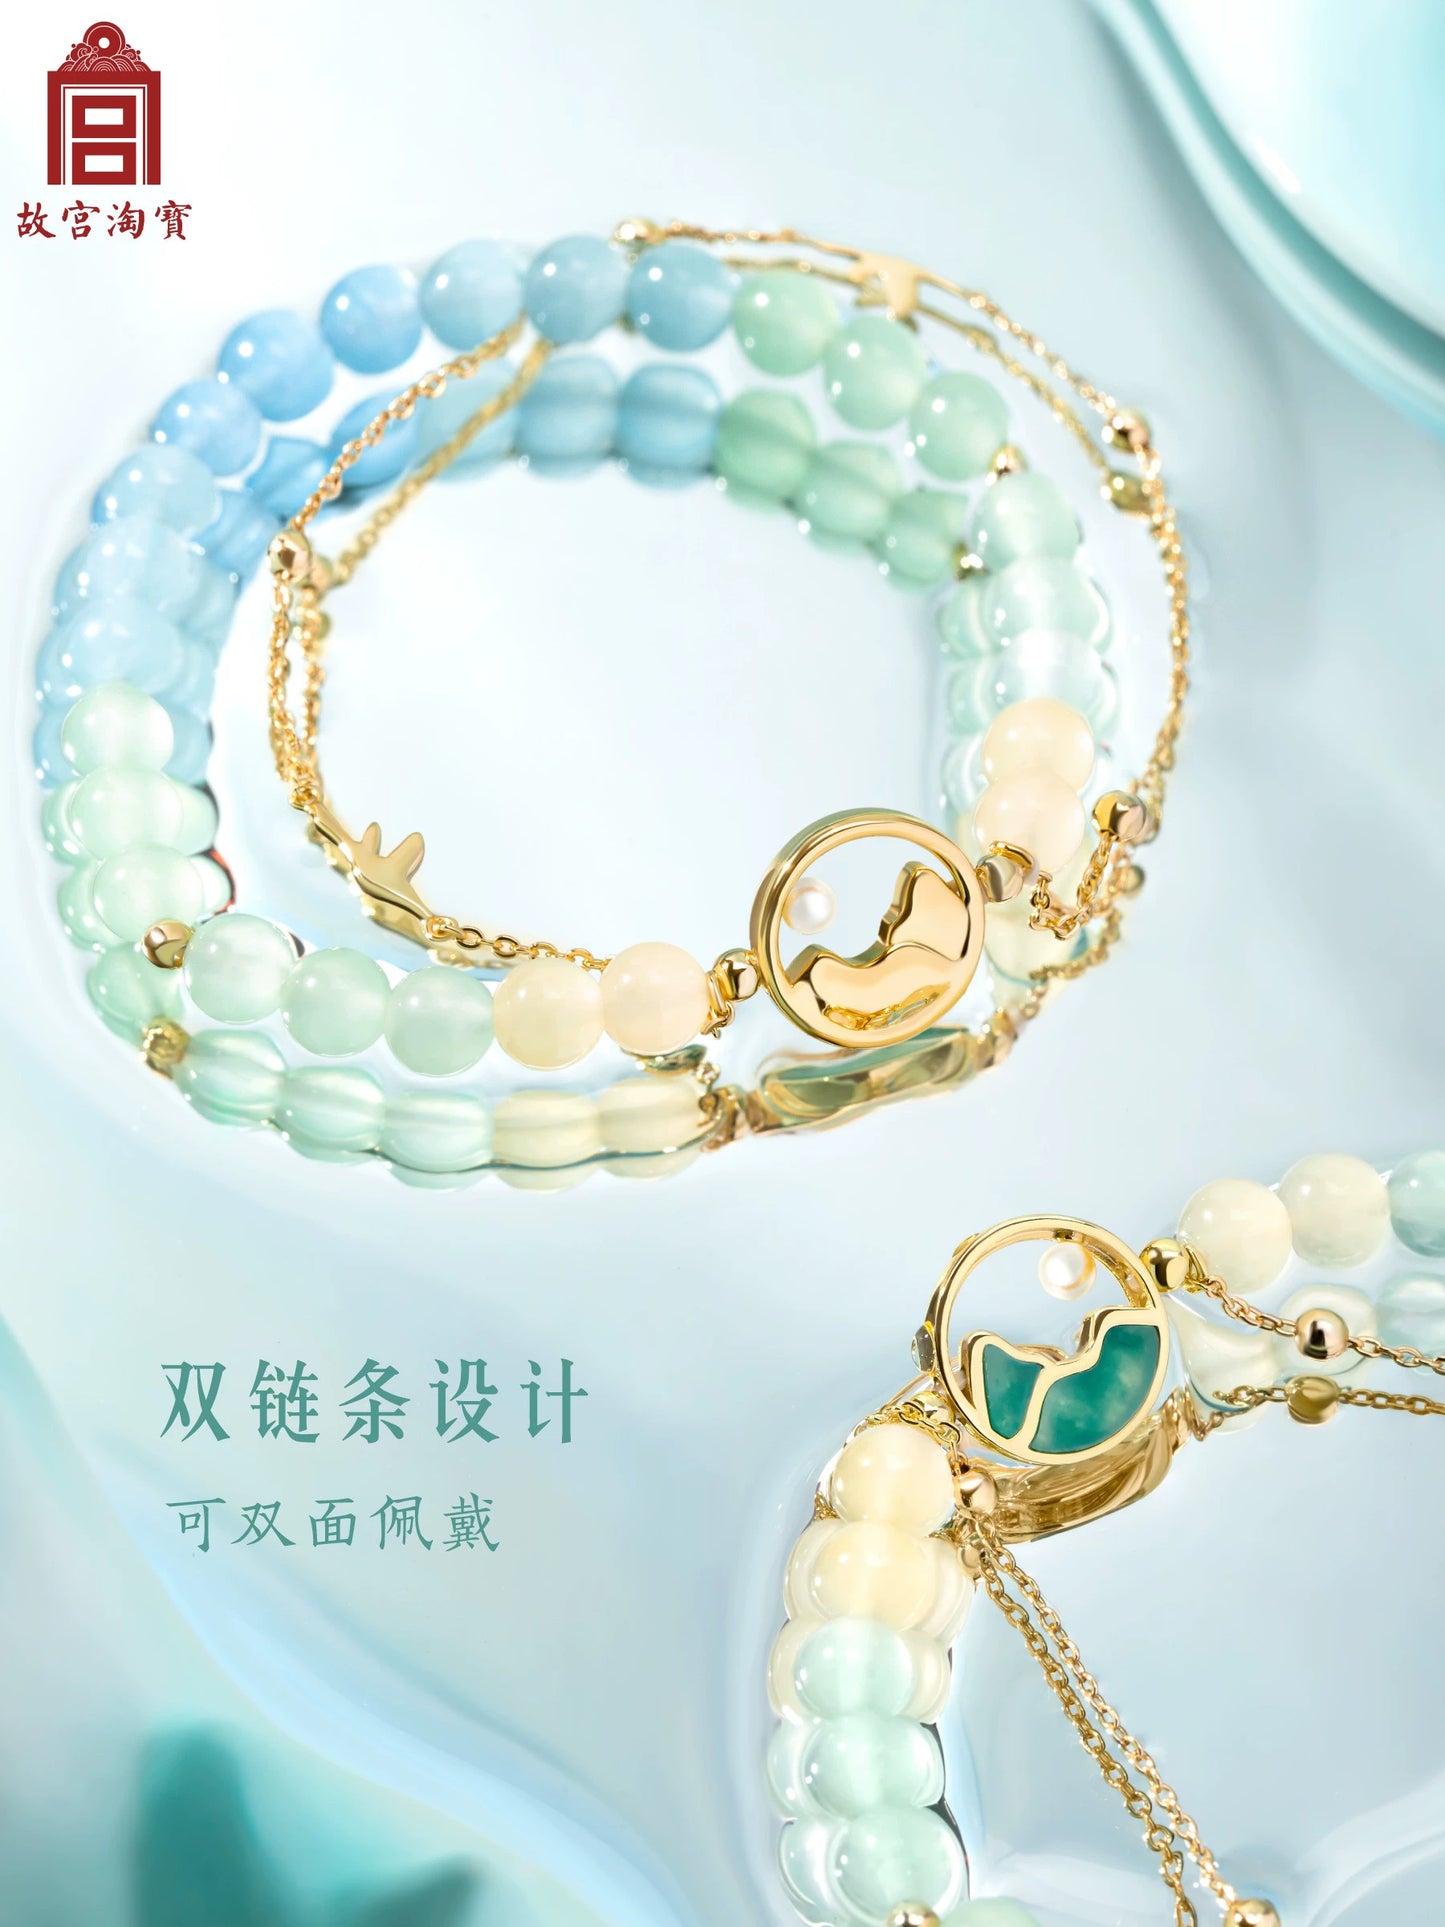 Palace Museum Qianli Jiangshan Bracelet Necklace, Women's Light Luxury, Small and Elegant Cultural and Creative Jewelry, Birthday Gift for Girls